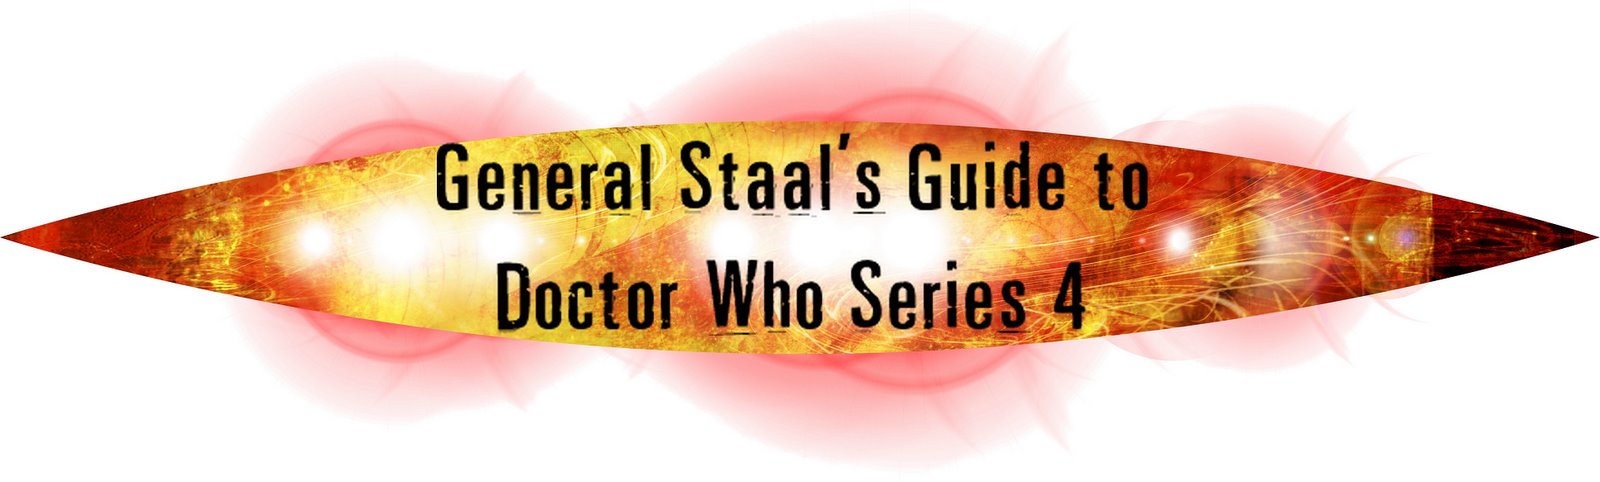 General Staal's Guide to Doctor Who